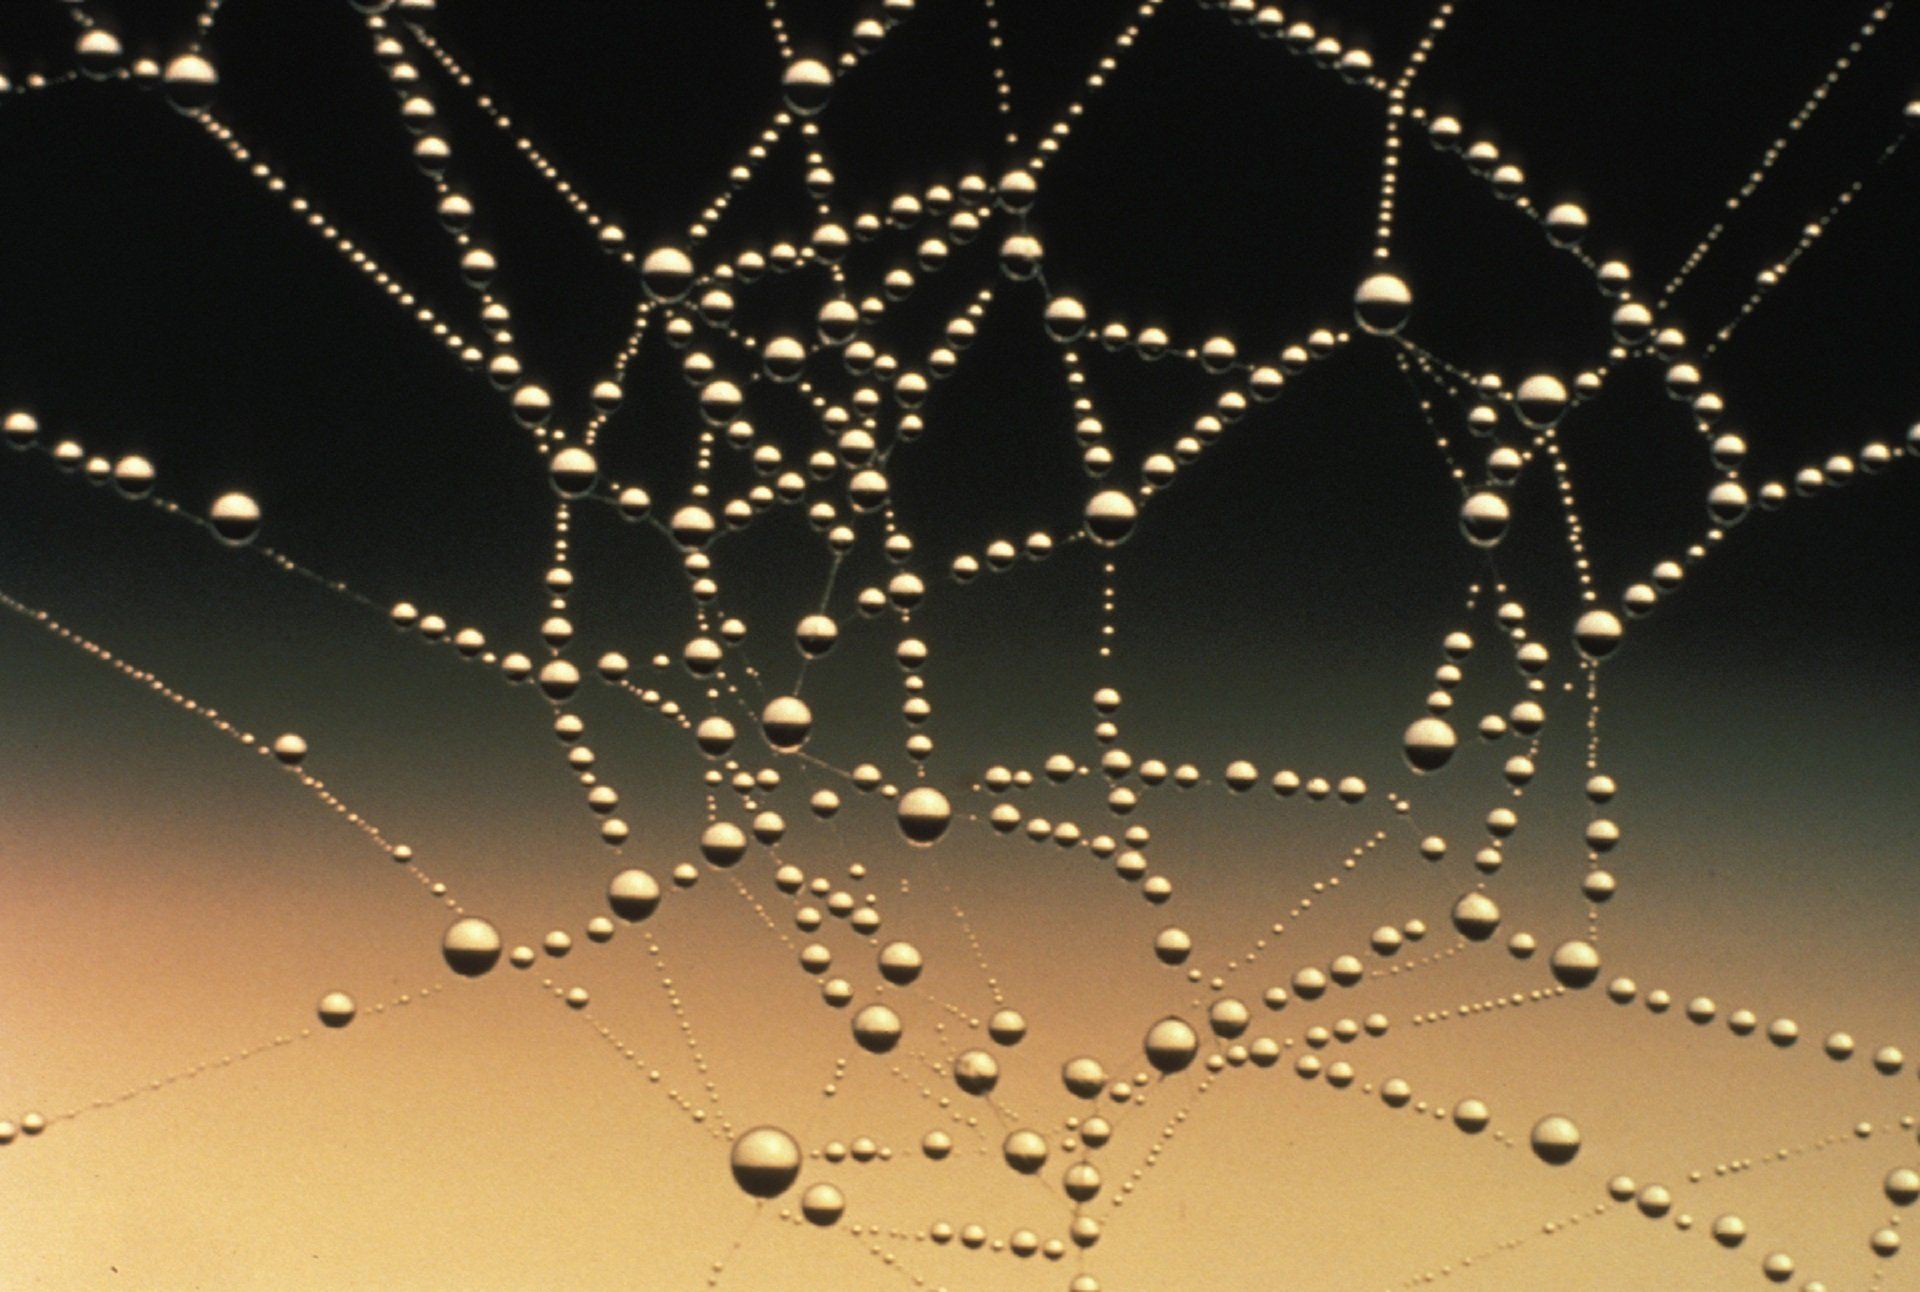 A close up of a spider web with water drops on it